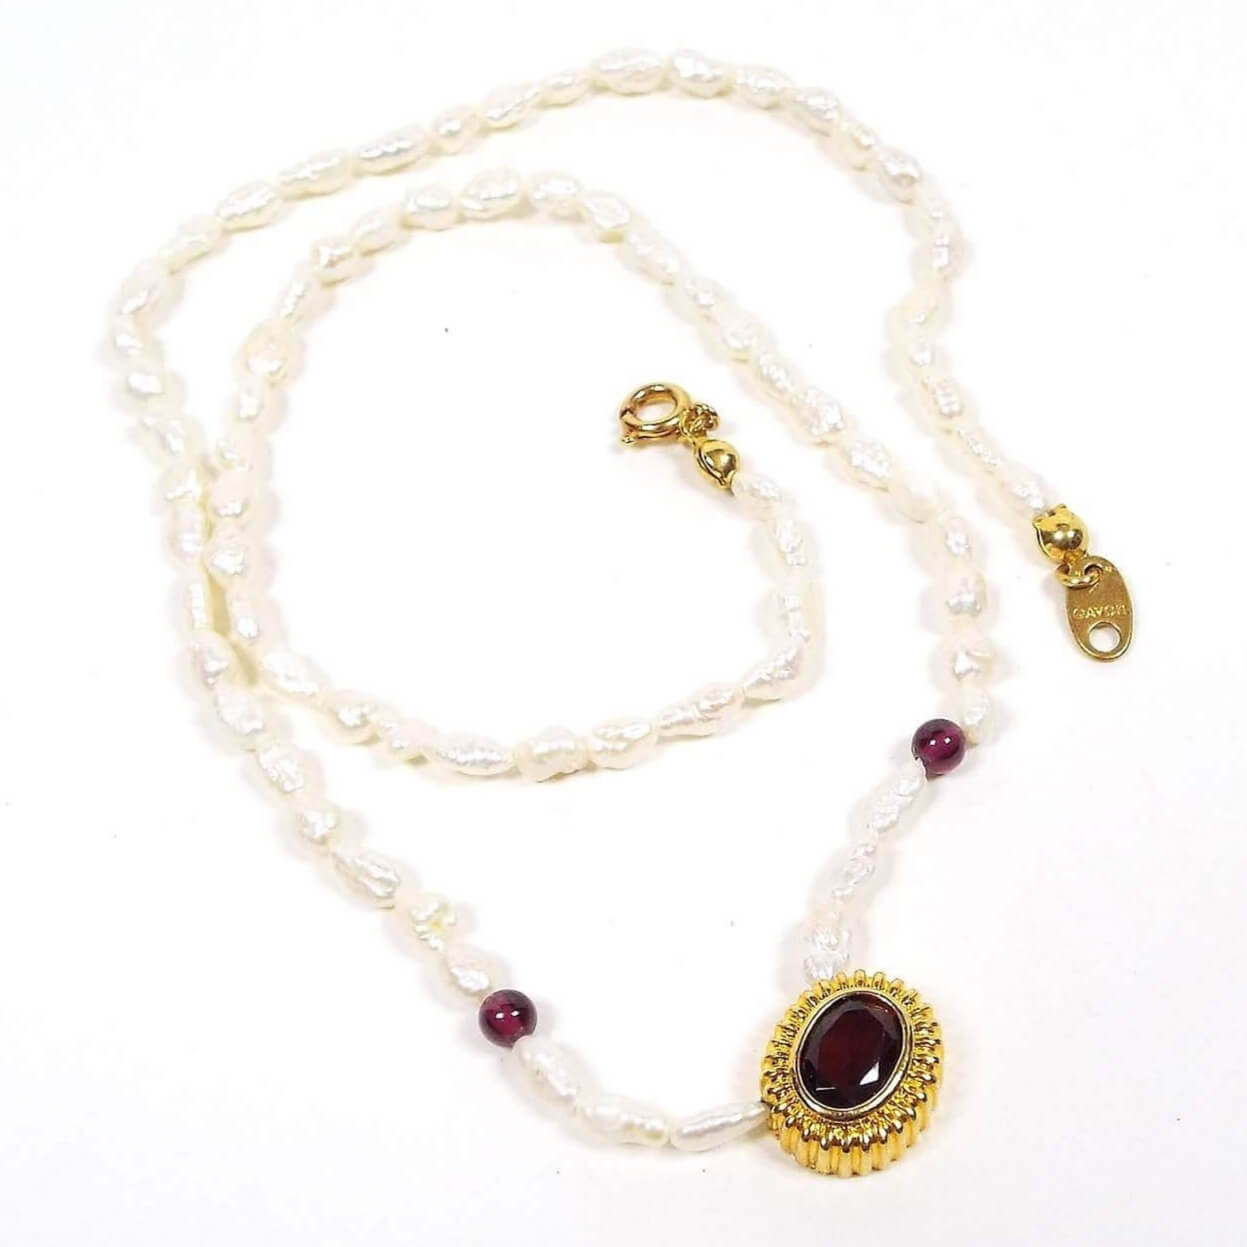 Top view of the retro vintage Avon garnet and freshwater cultured pearl beaded pendant necklace. The metal around the pendant and clasp is gold tone in color. The necklace is beaded with small rice pearls and two small round garnet beads. The bottom pendant has an oval garnet cab in the middle. 